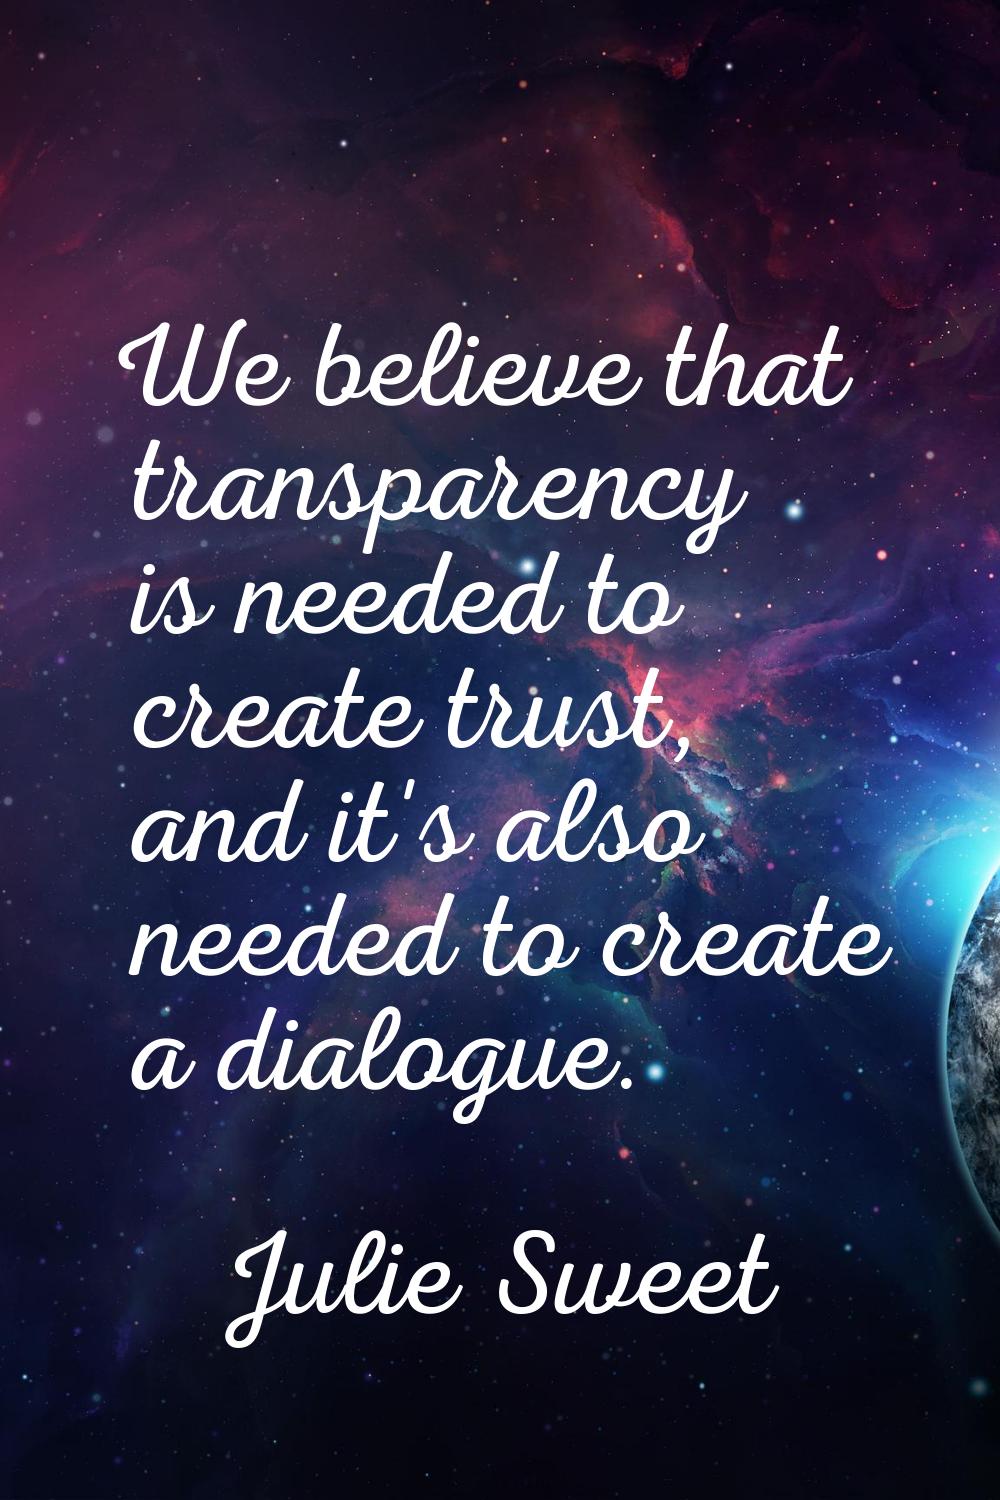 We believe that transparency is needed to create trust, and it's also needed to create a dialogue.